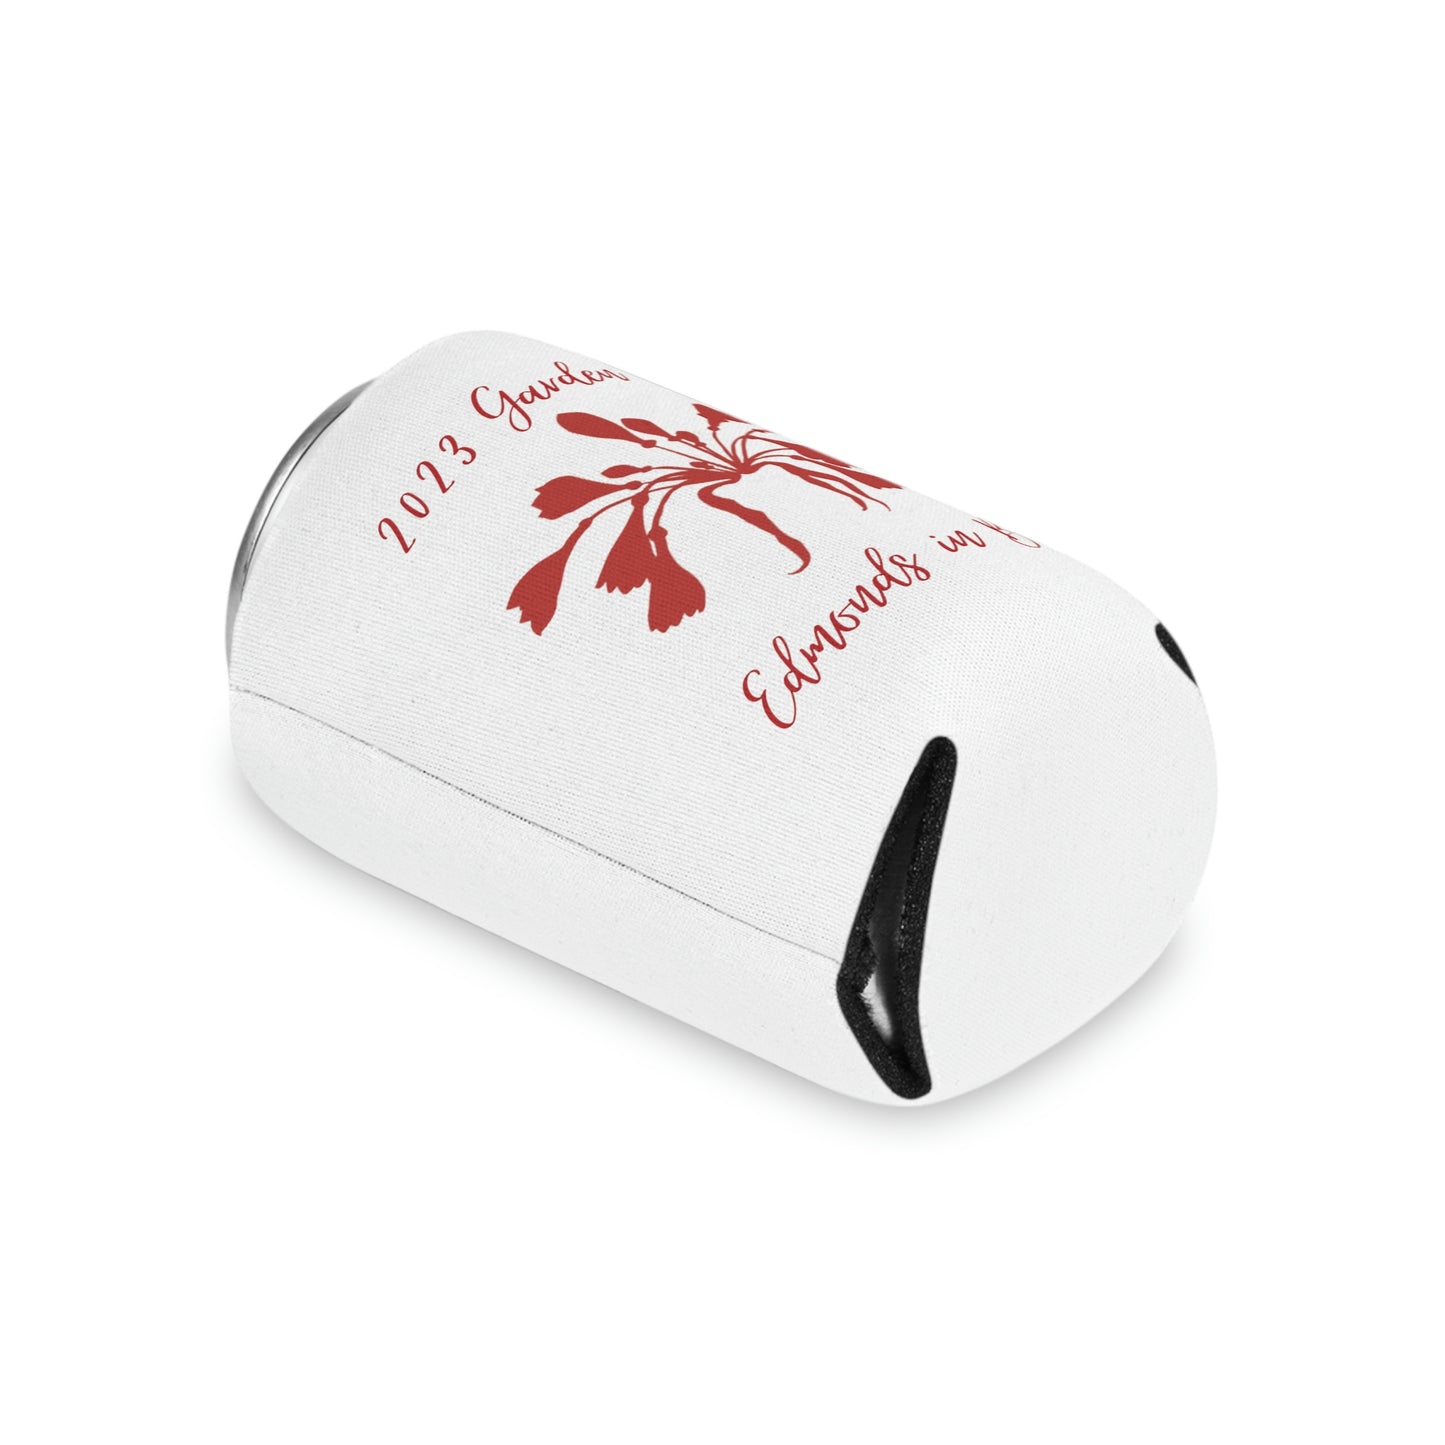 2023 Garden Tour Can Cooler (Red Graphic)